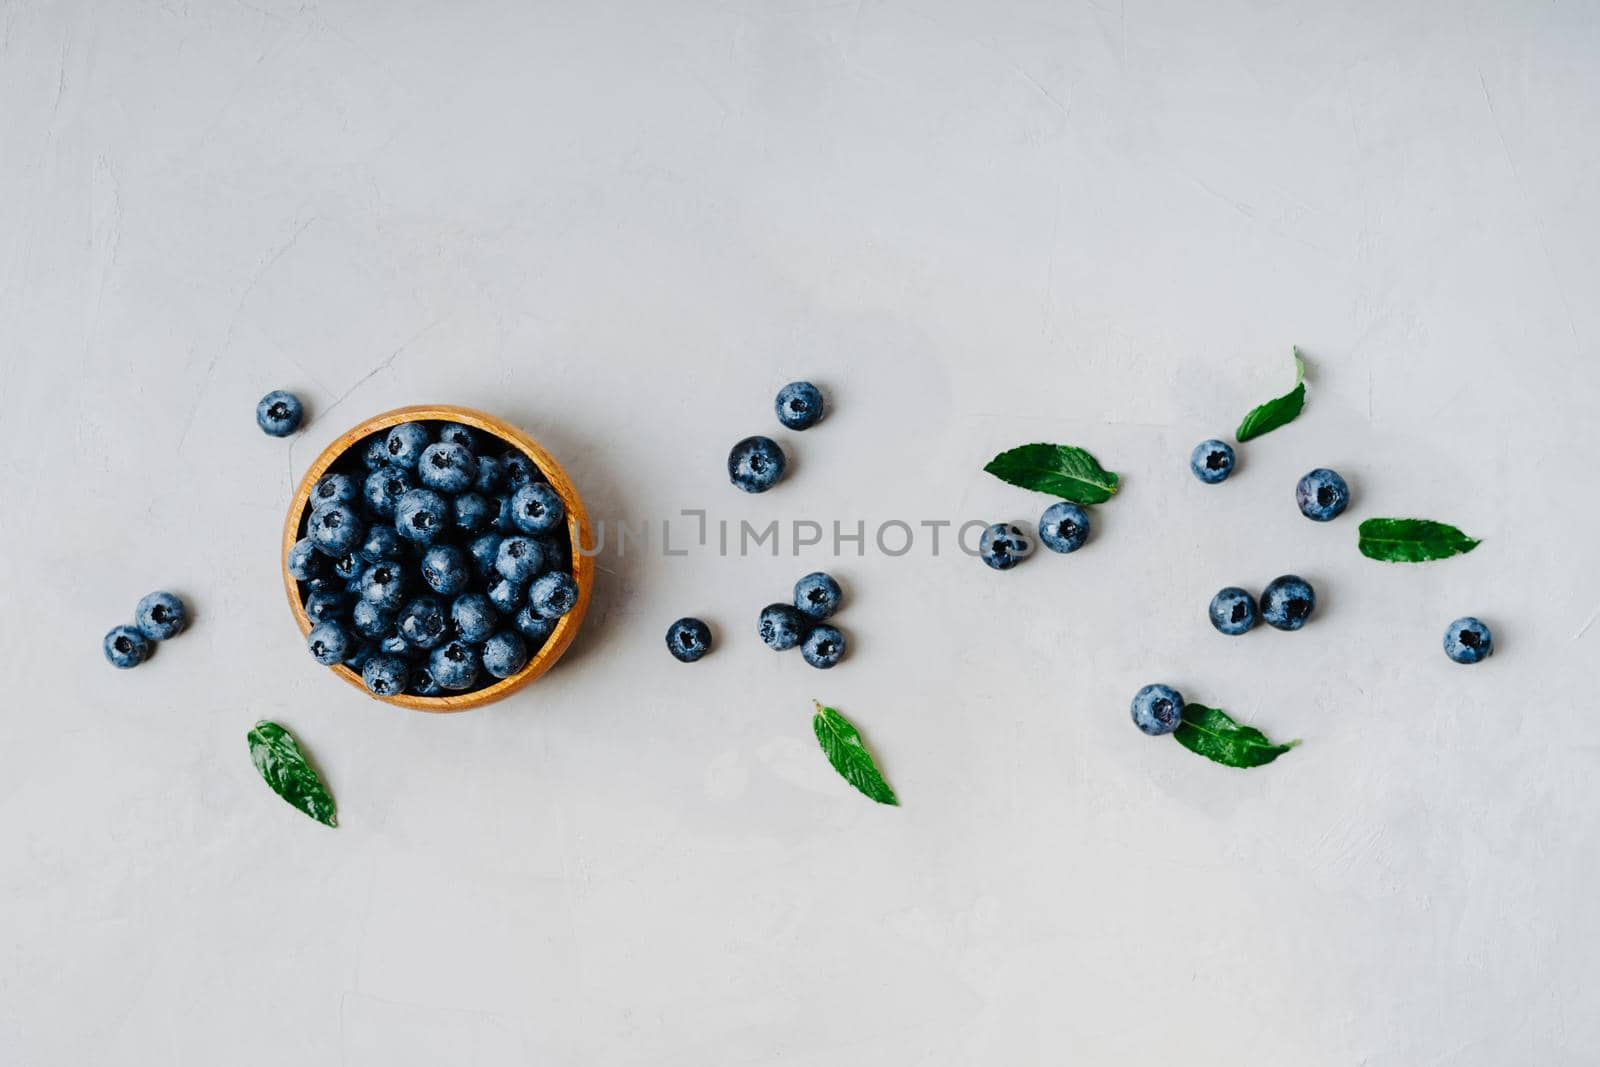 Blueberries are scattered on a gray table. Berries on a gray textured background. Top view of a bowl of blueberries. Fresh mint. The concept of healthy eating and nutrition.